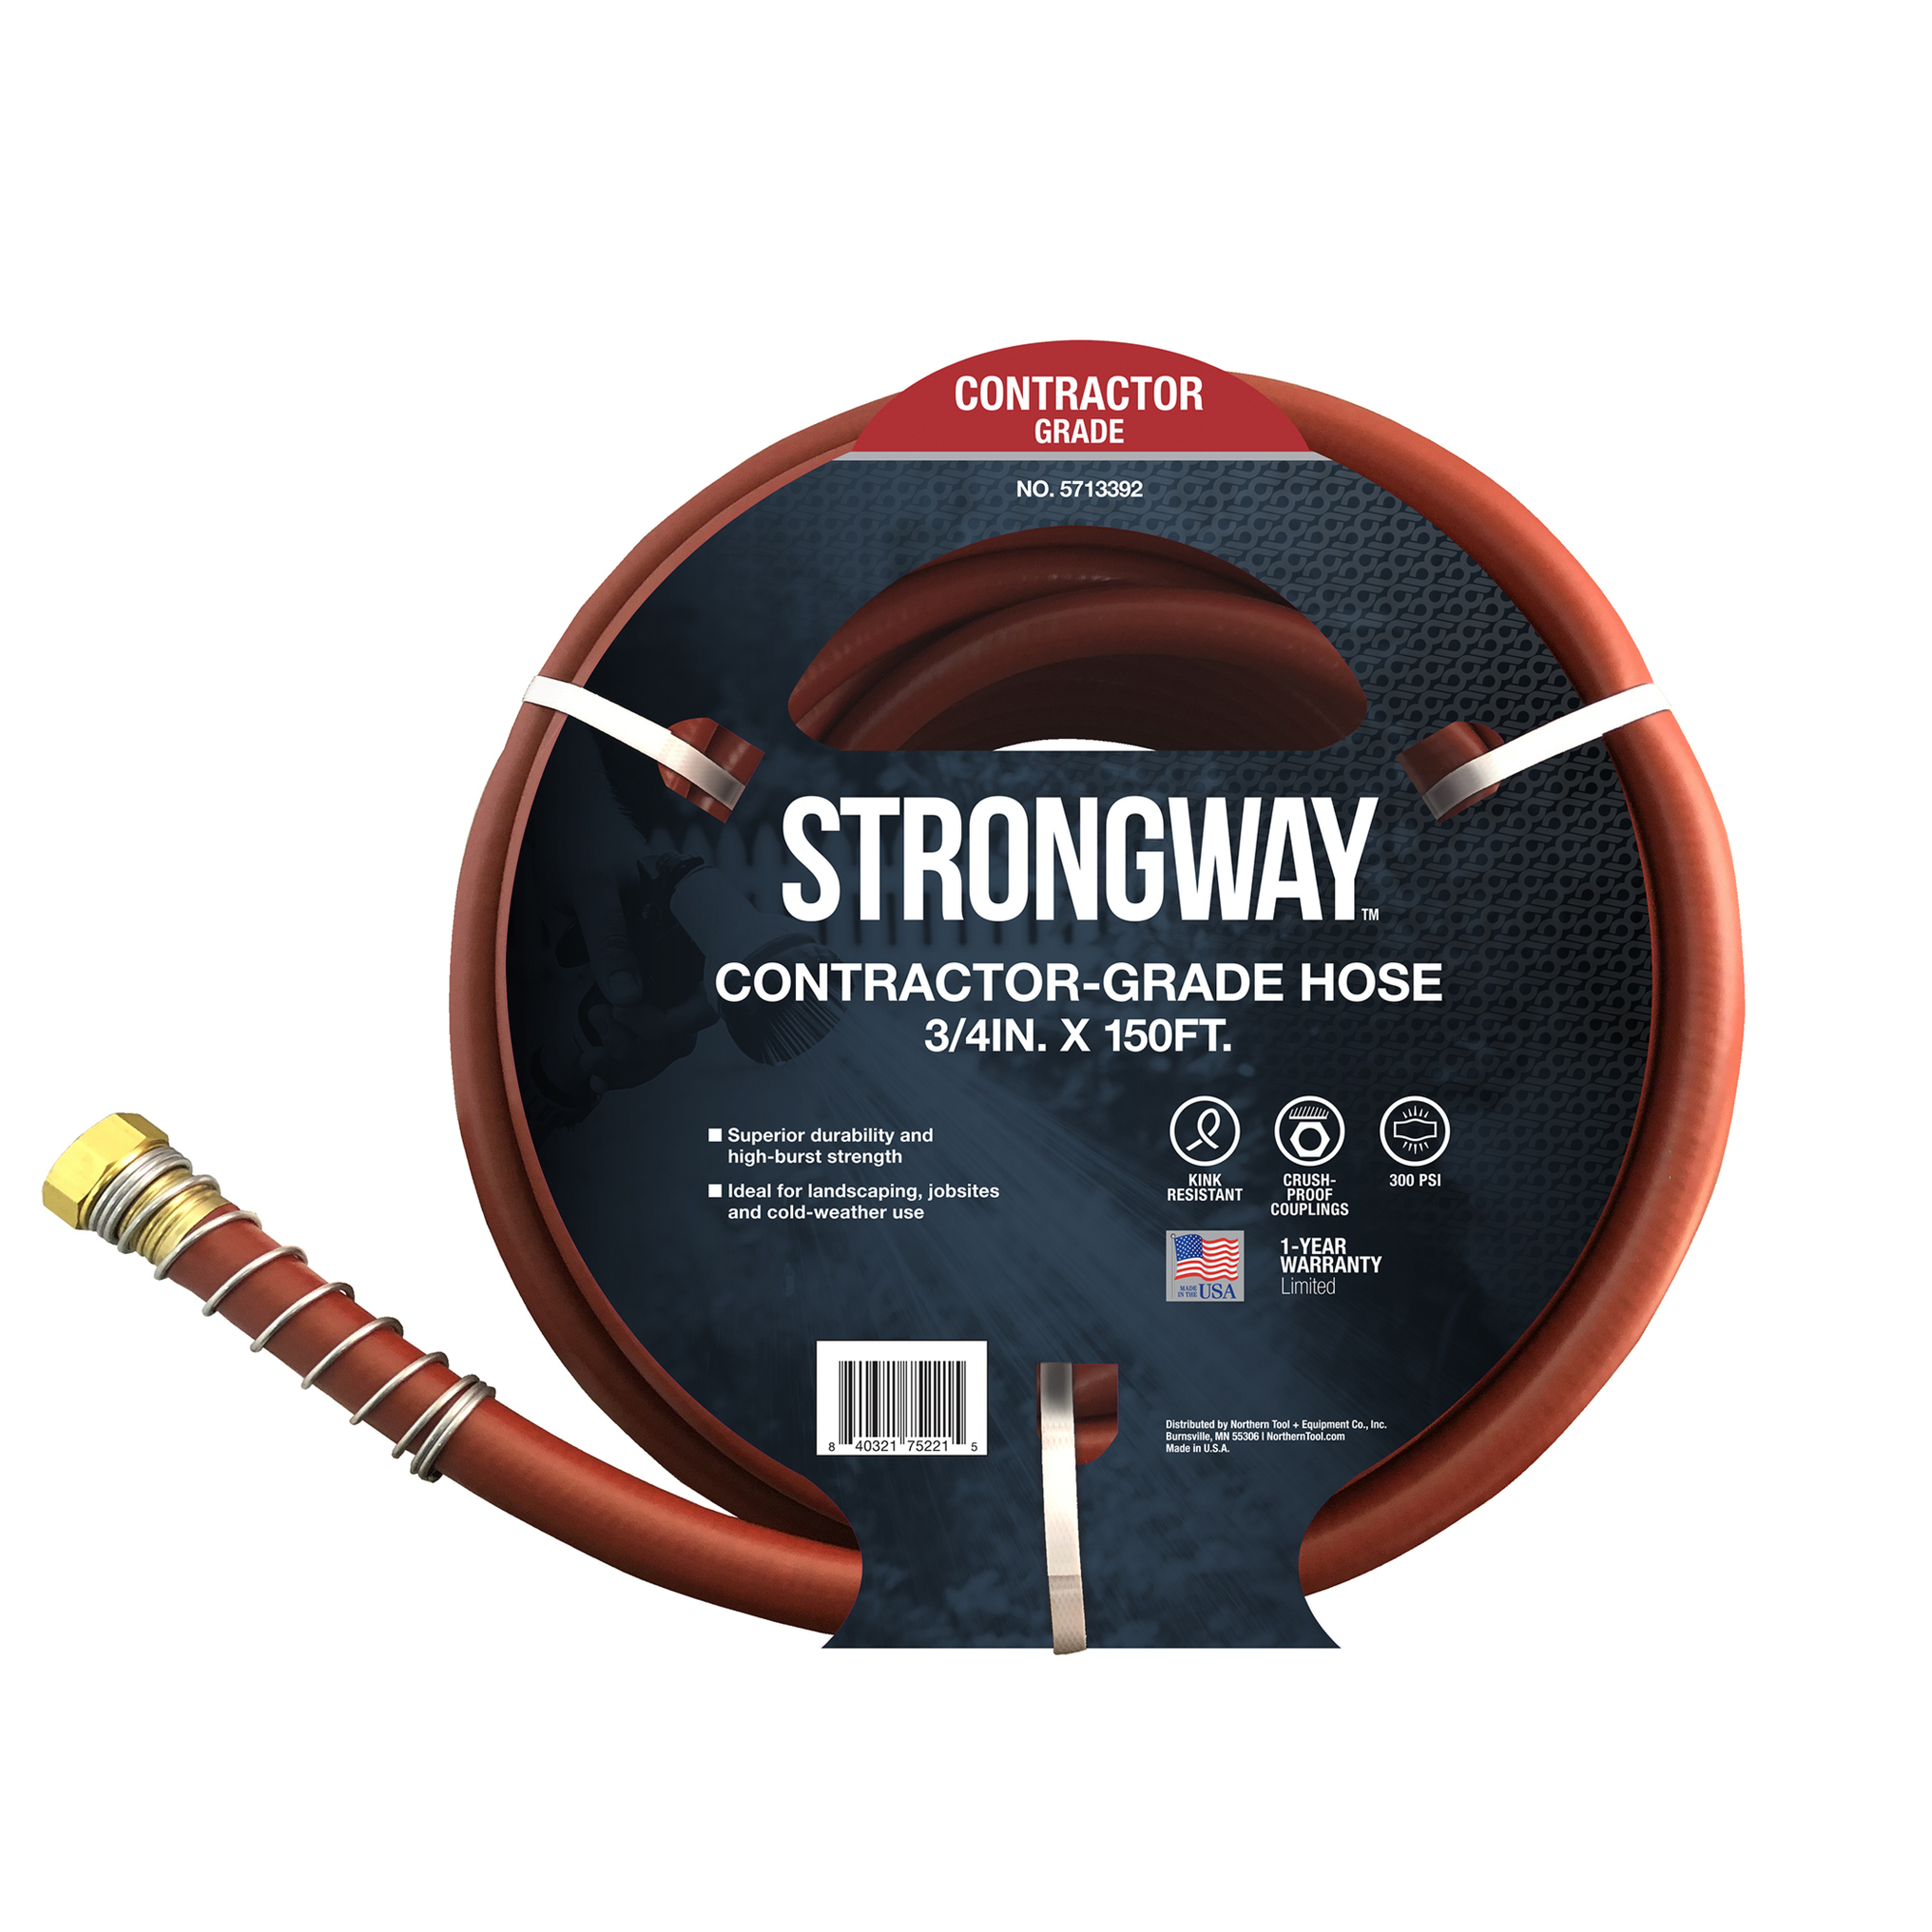 Strongway Contractor-Grade Water Hose, 3/4Inch x 150ft., 300 PSI, Model CX34150SW